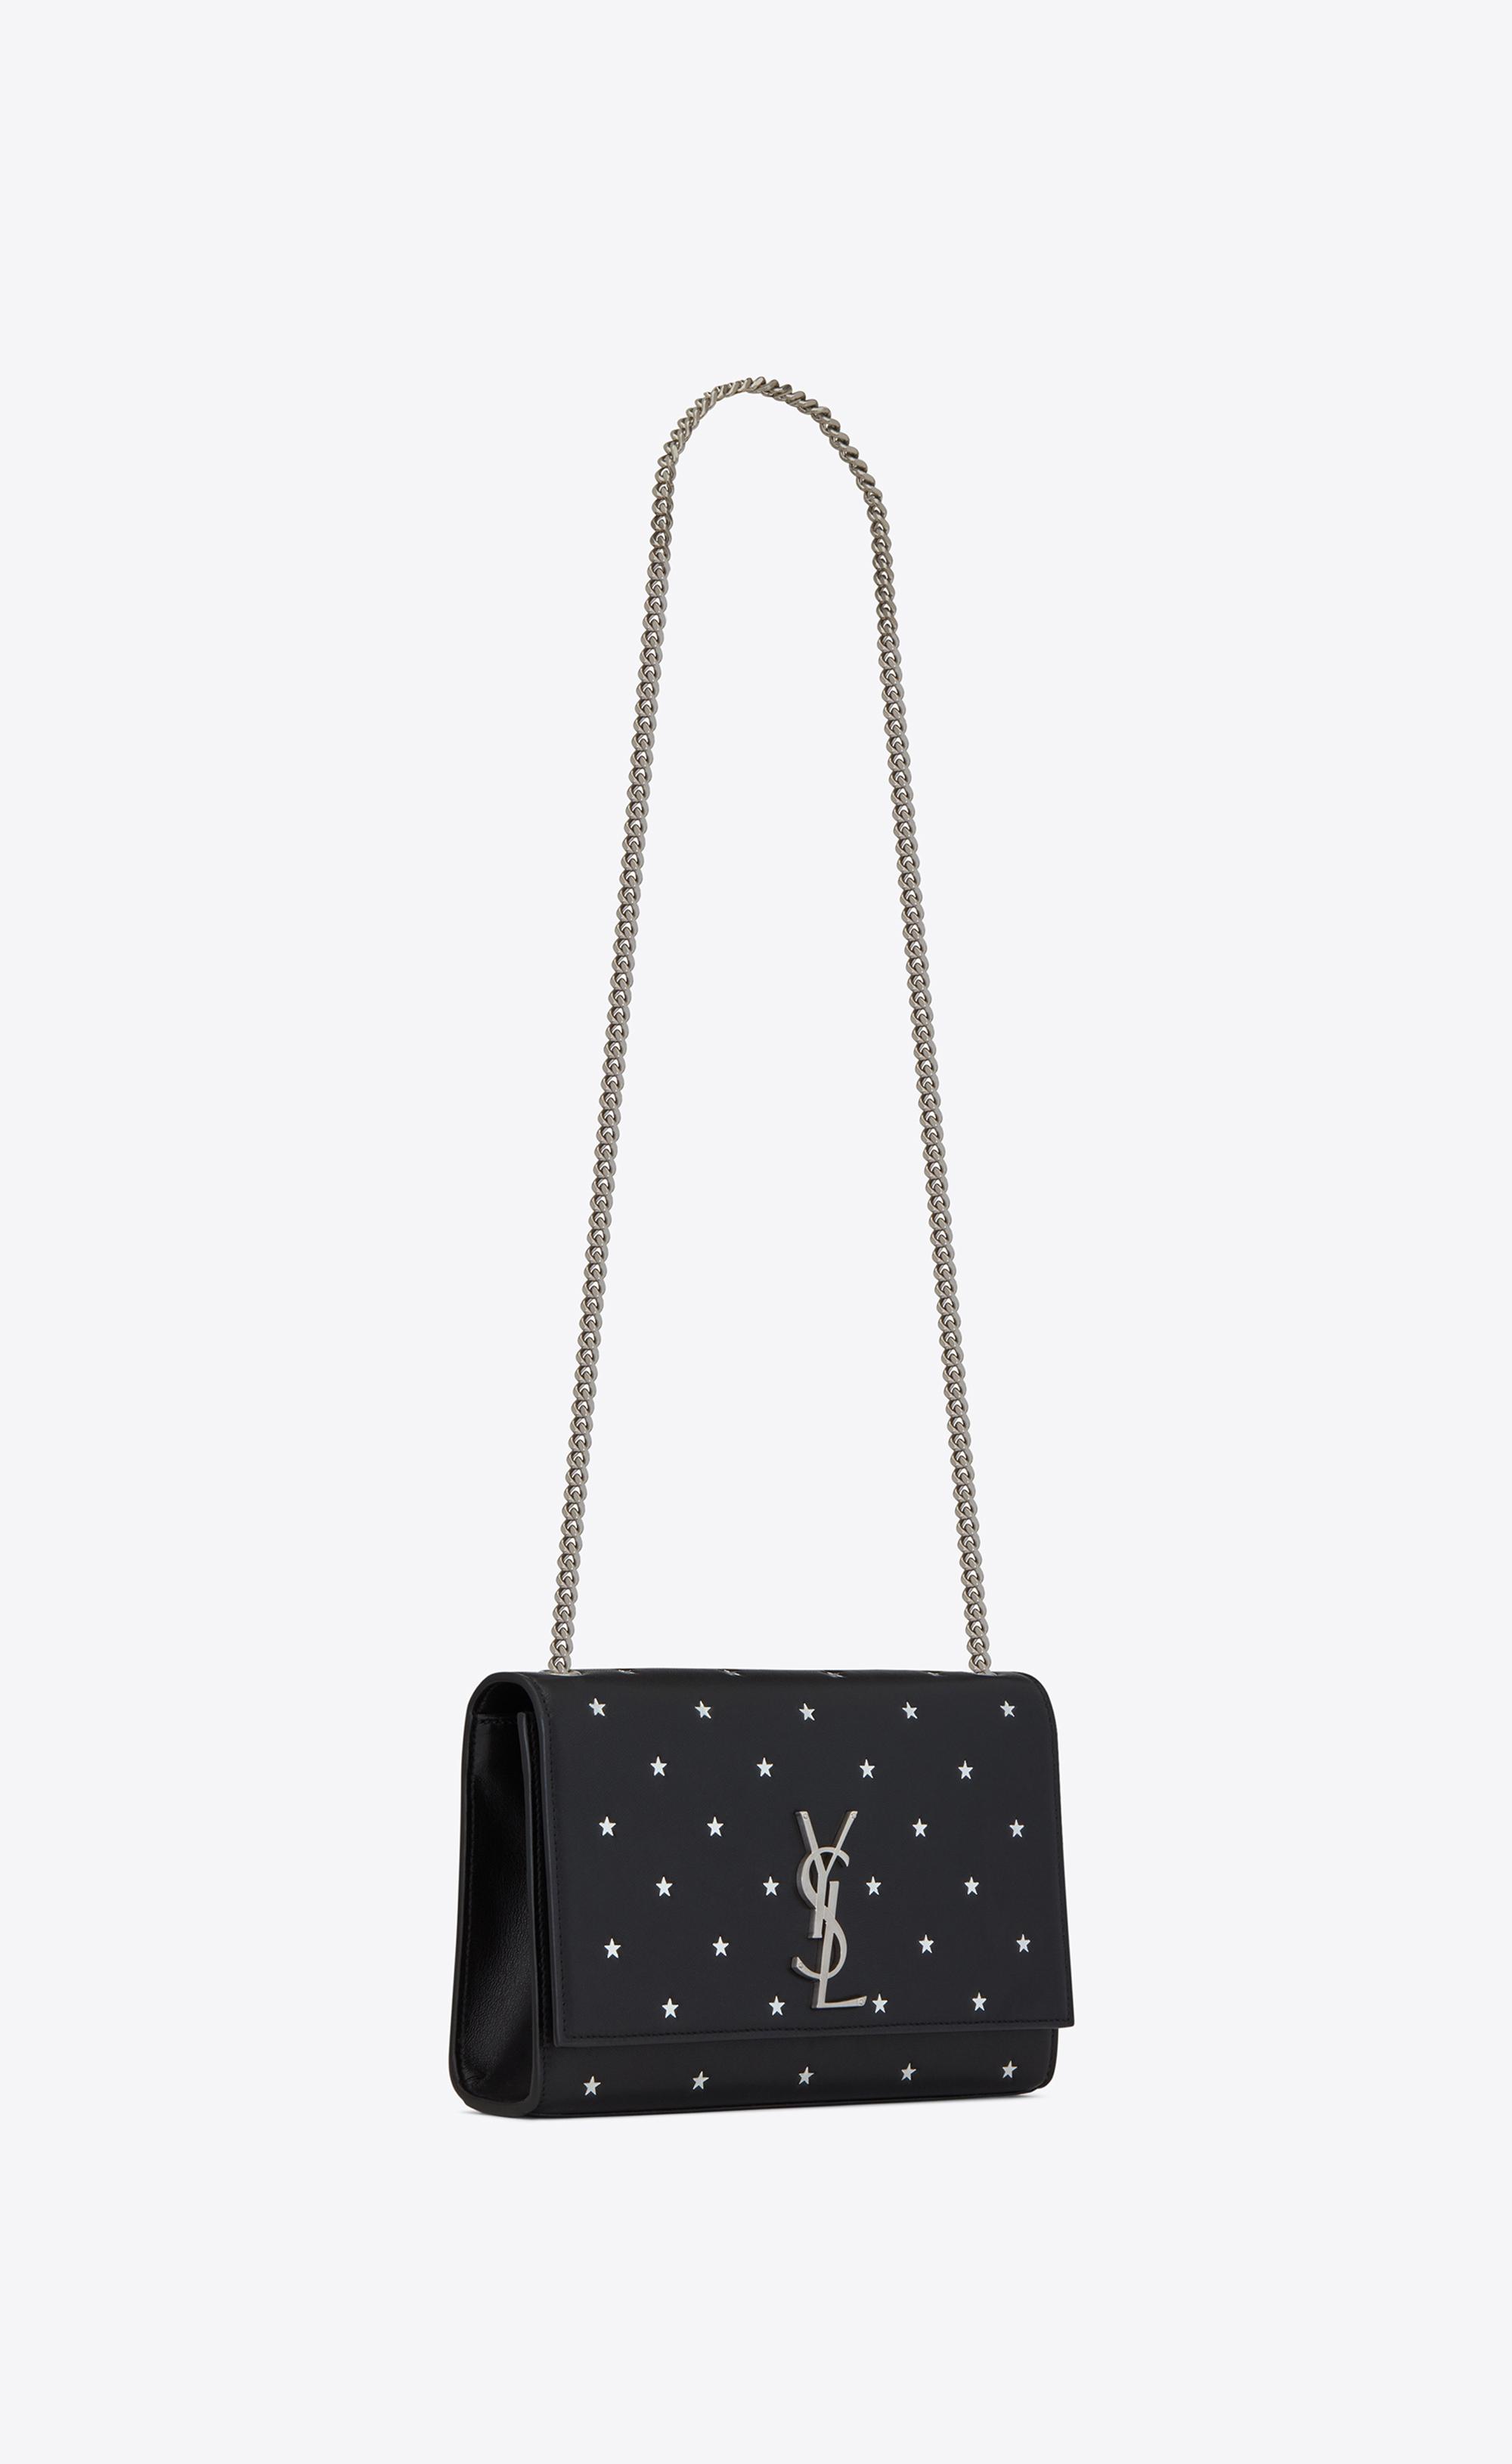 Saint Laurent Kate Medium In Smooth Leather With Little Stars